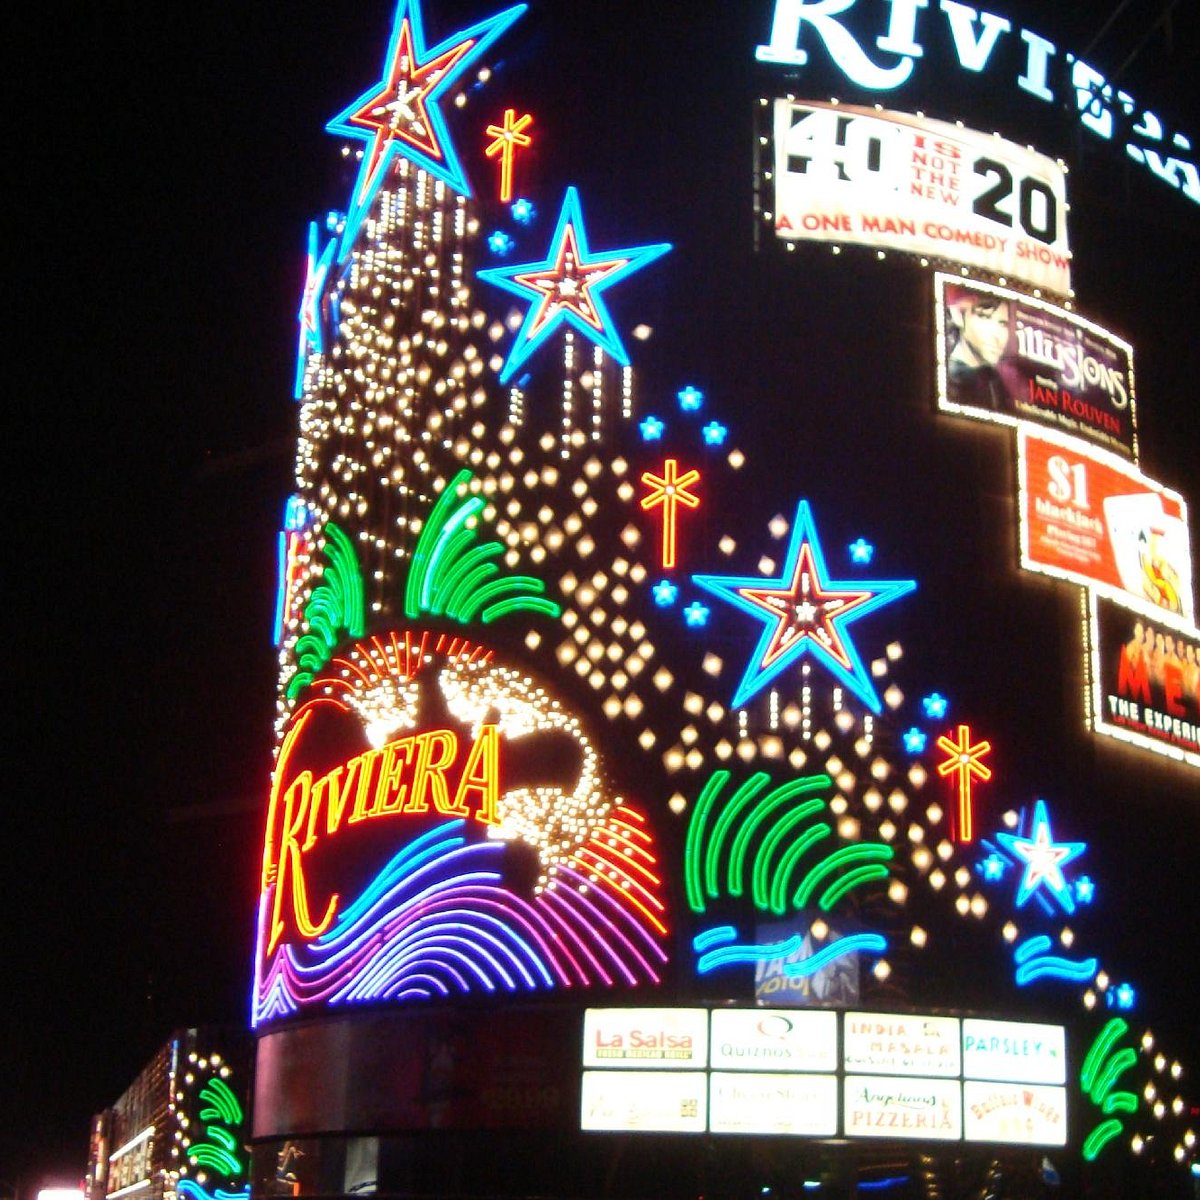 Vegas Movies and The Riviera Hotel - Riviera Hotel